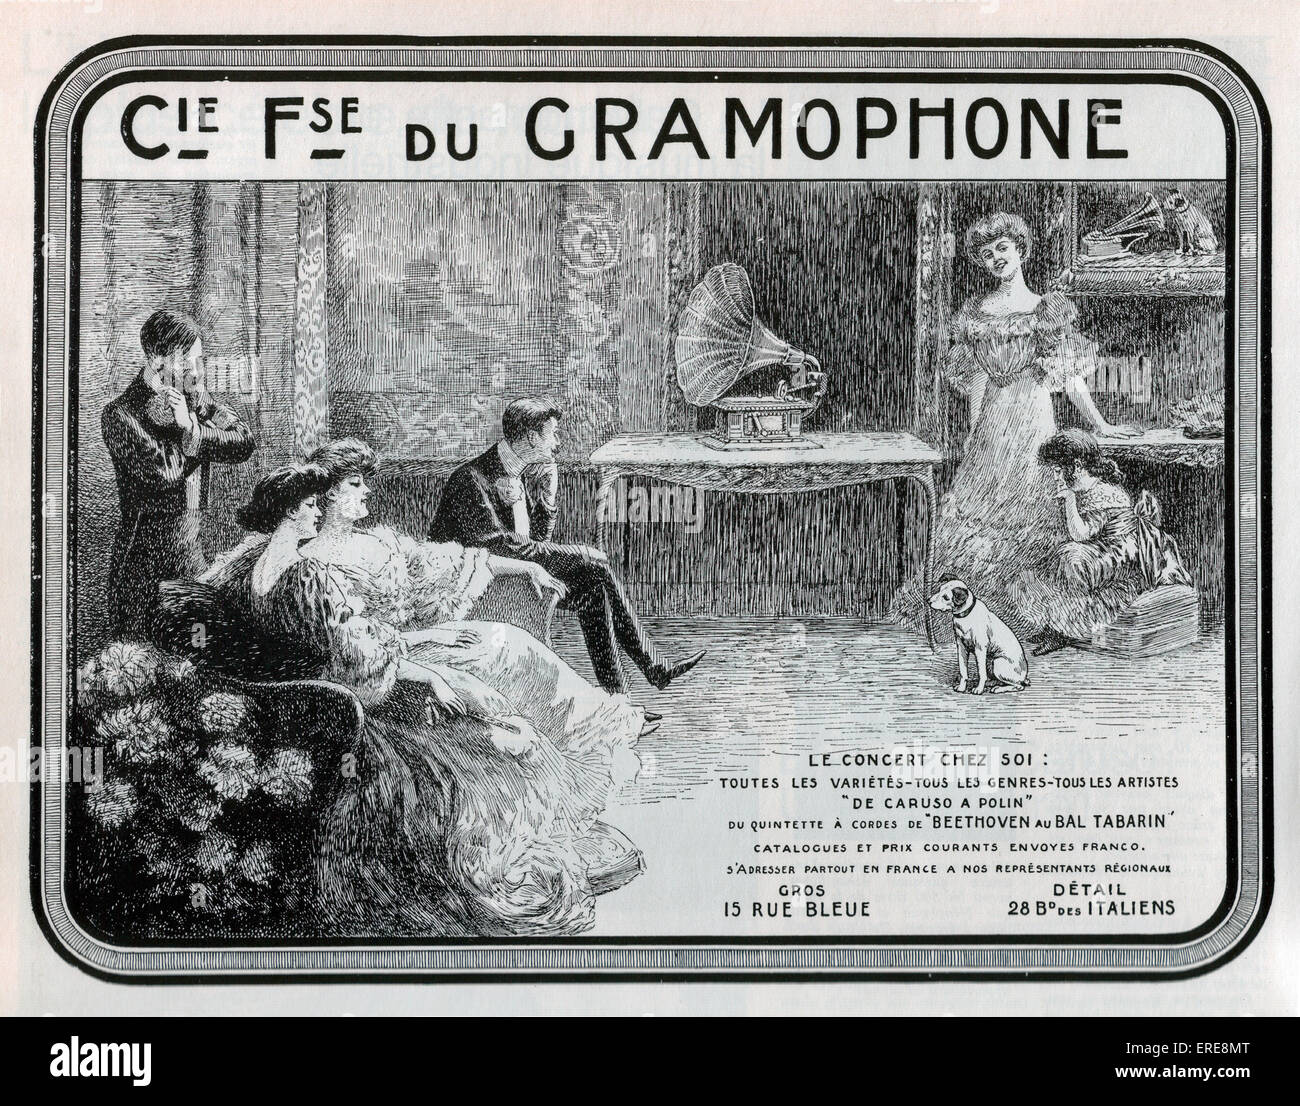 1905 gramophone advert by the Compagnie Française du Gramophone. A group of elegant people listening to music, with a Stock Photo